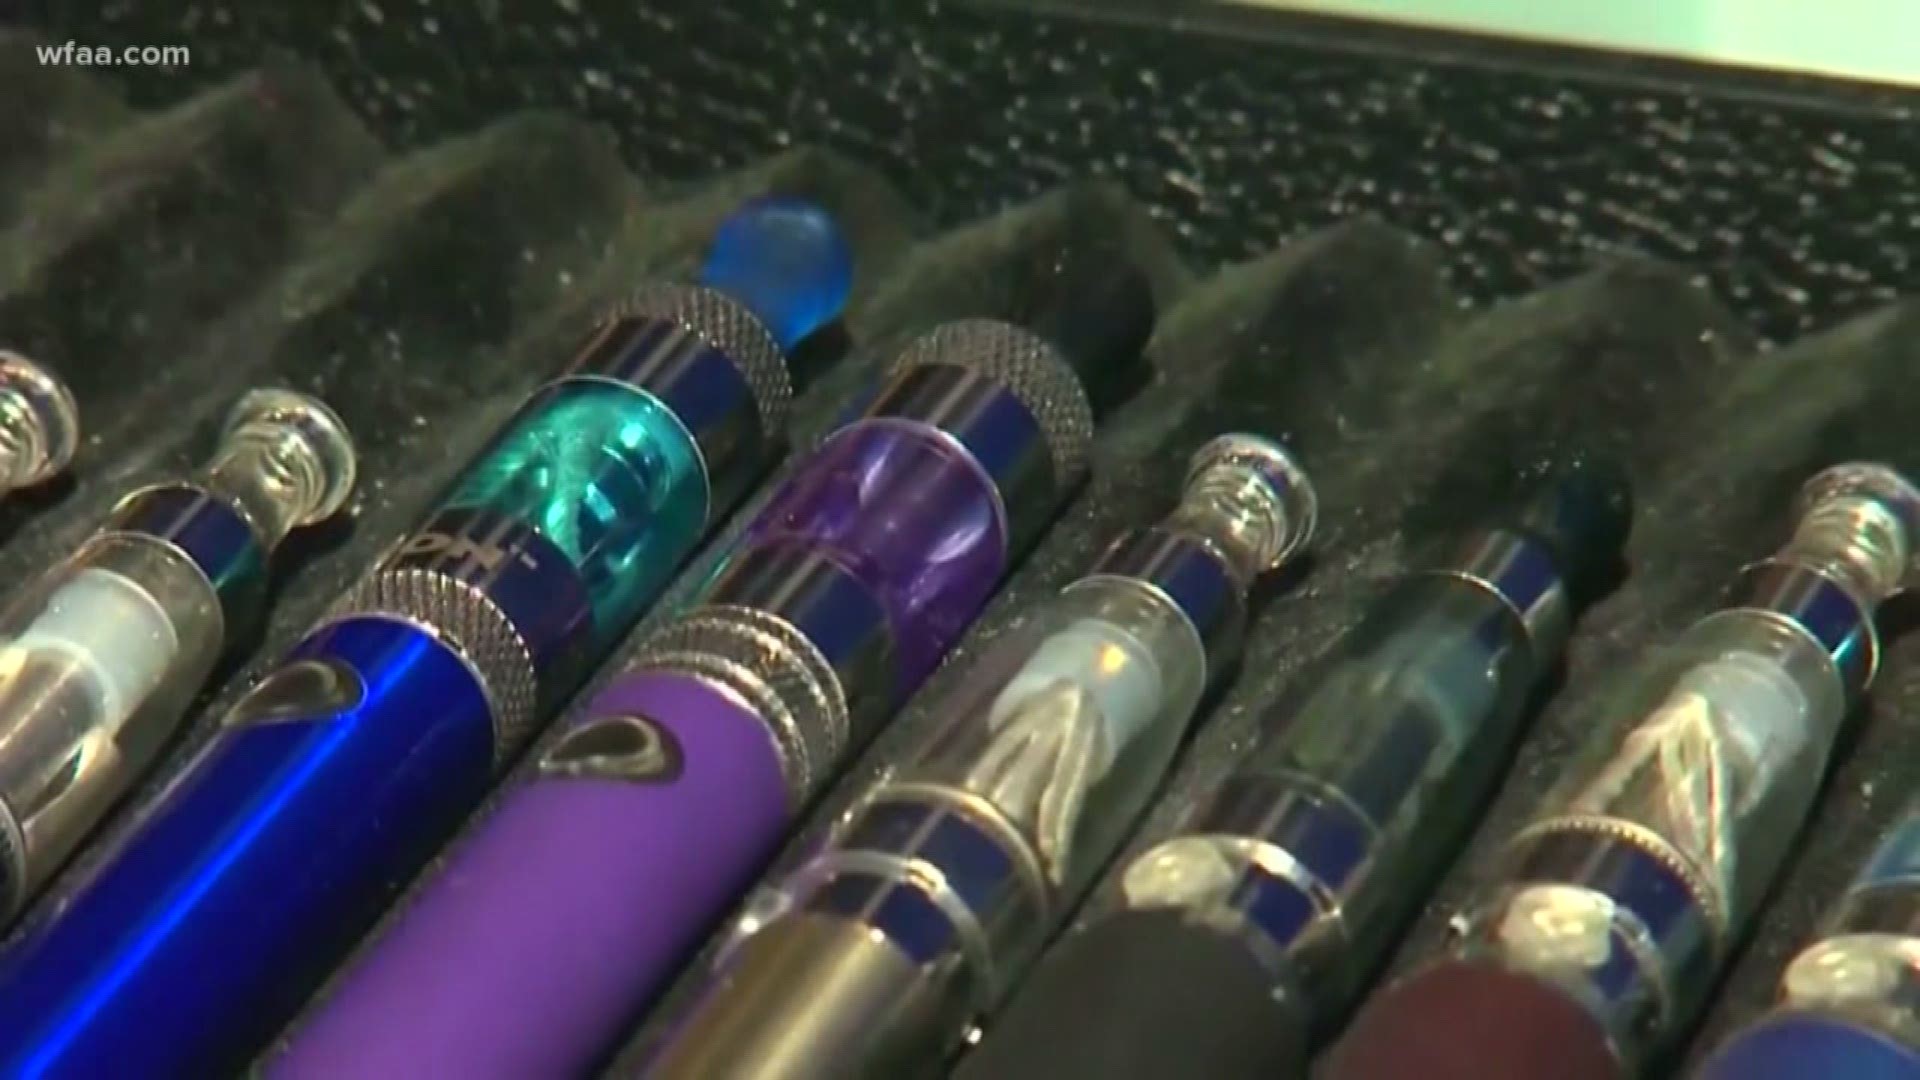 WFAA's Sonia Azad examines whether vaping is healthier than smoking, along with Tuesday's other top health headlines.